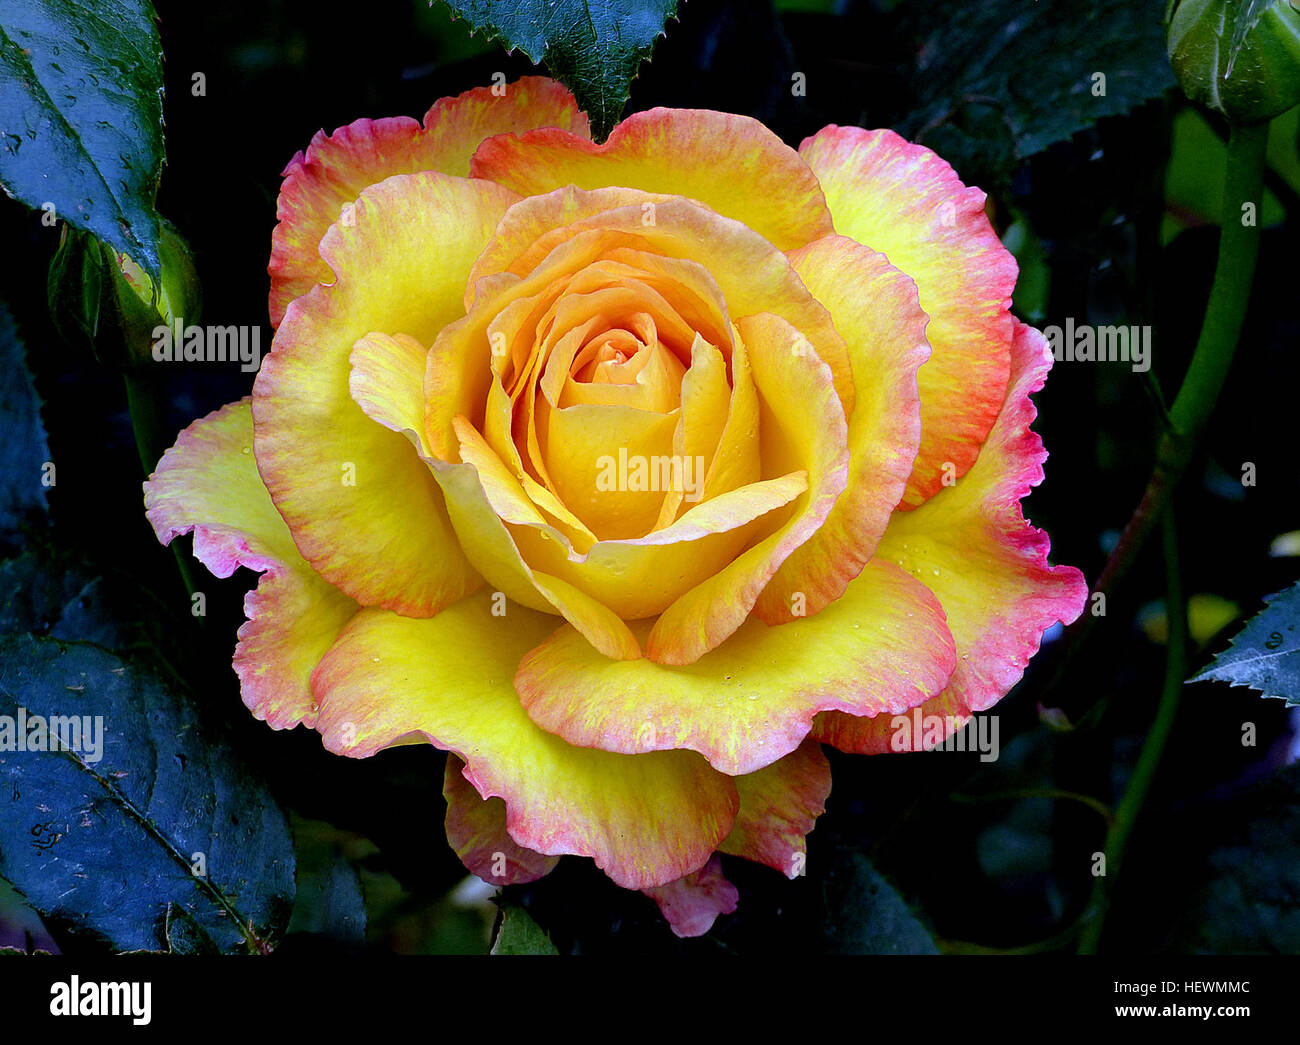 Solitaire Year 1987 Hybrid Tea Roses Height 4ft Plus Every Now And Stock Photo Alamy